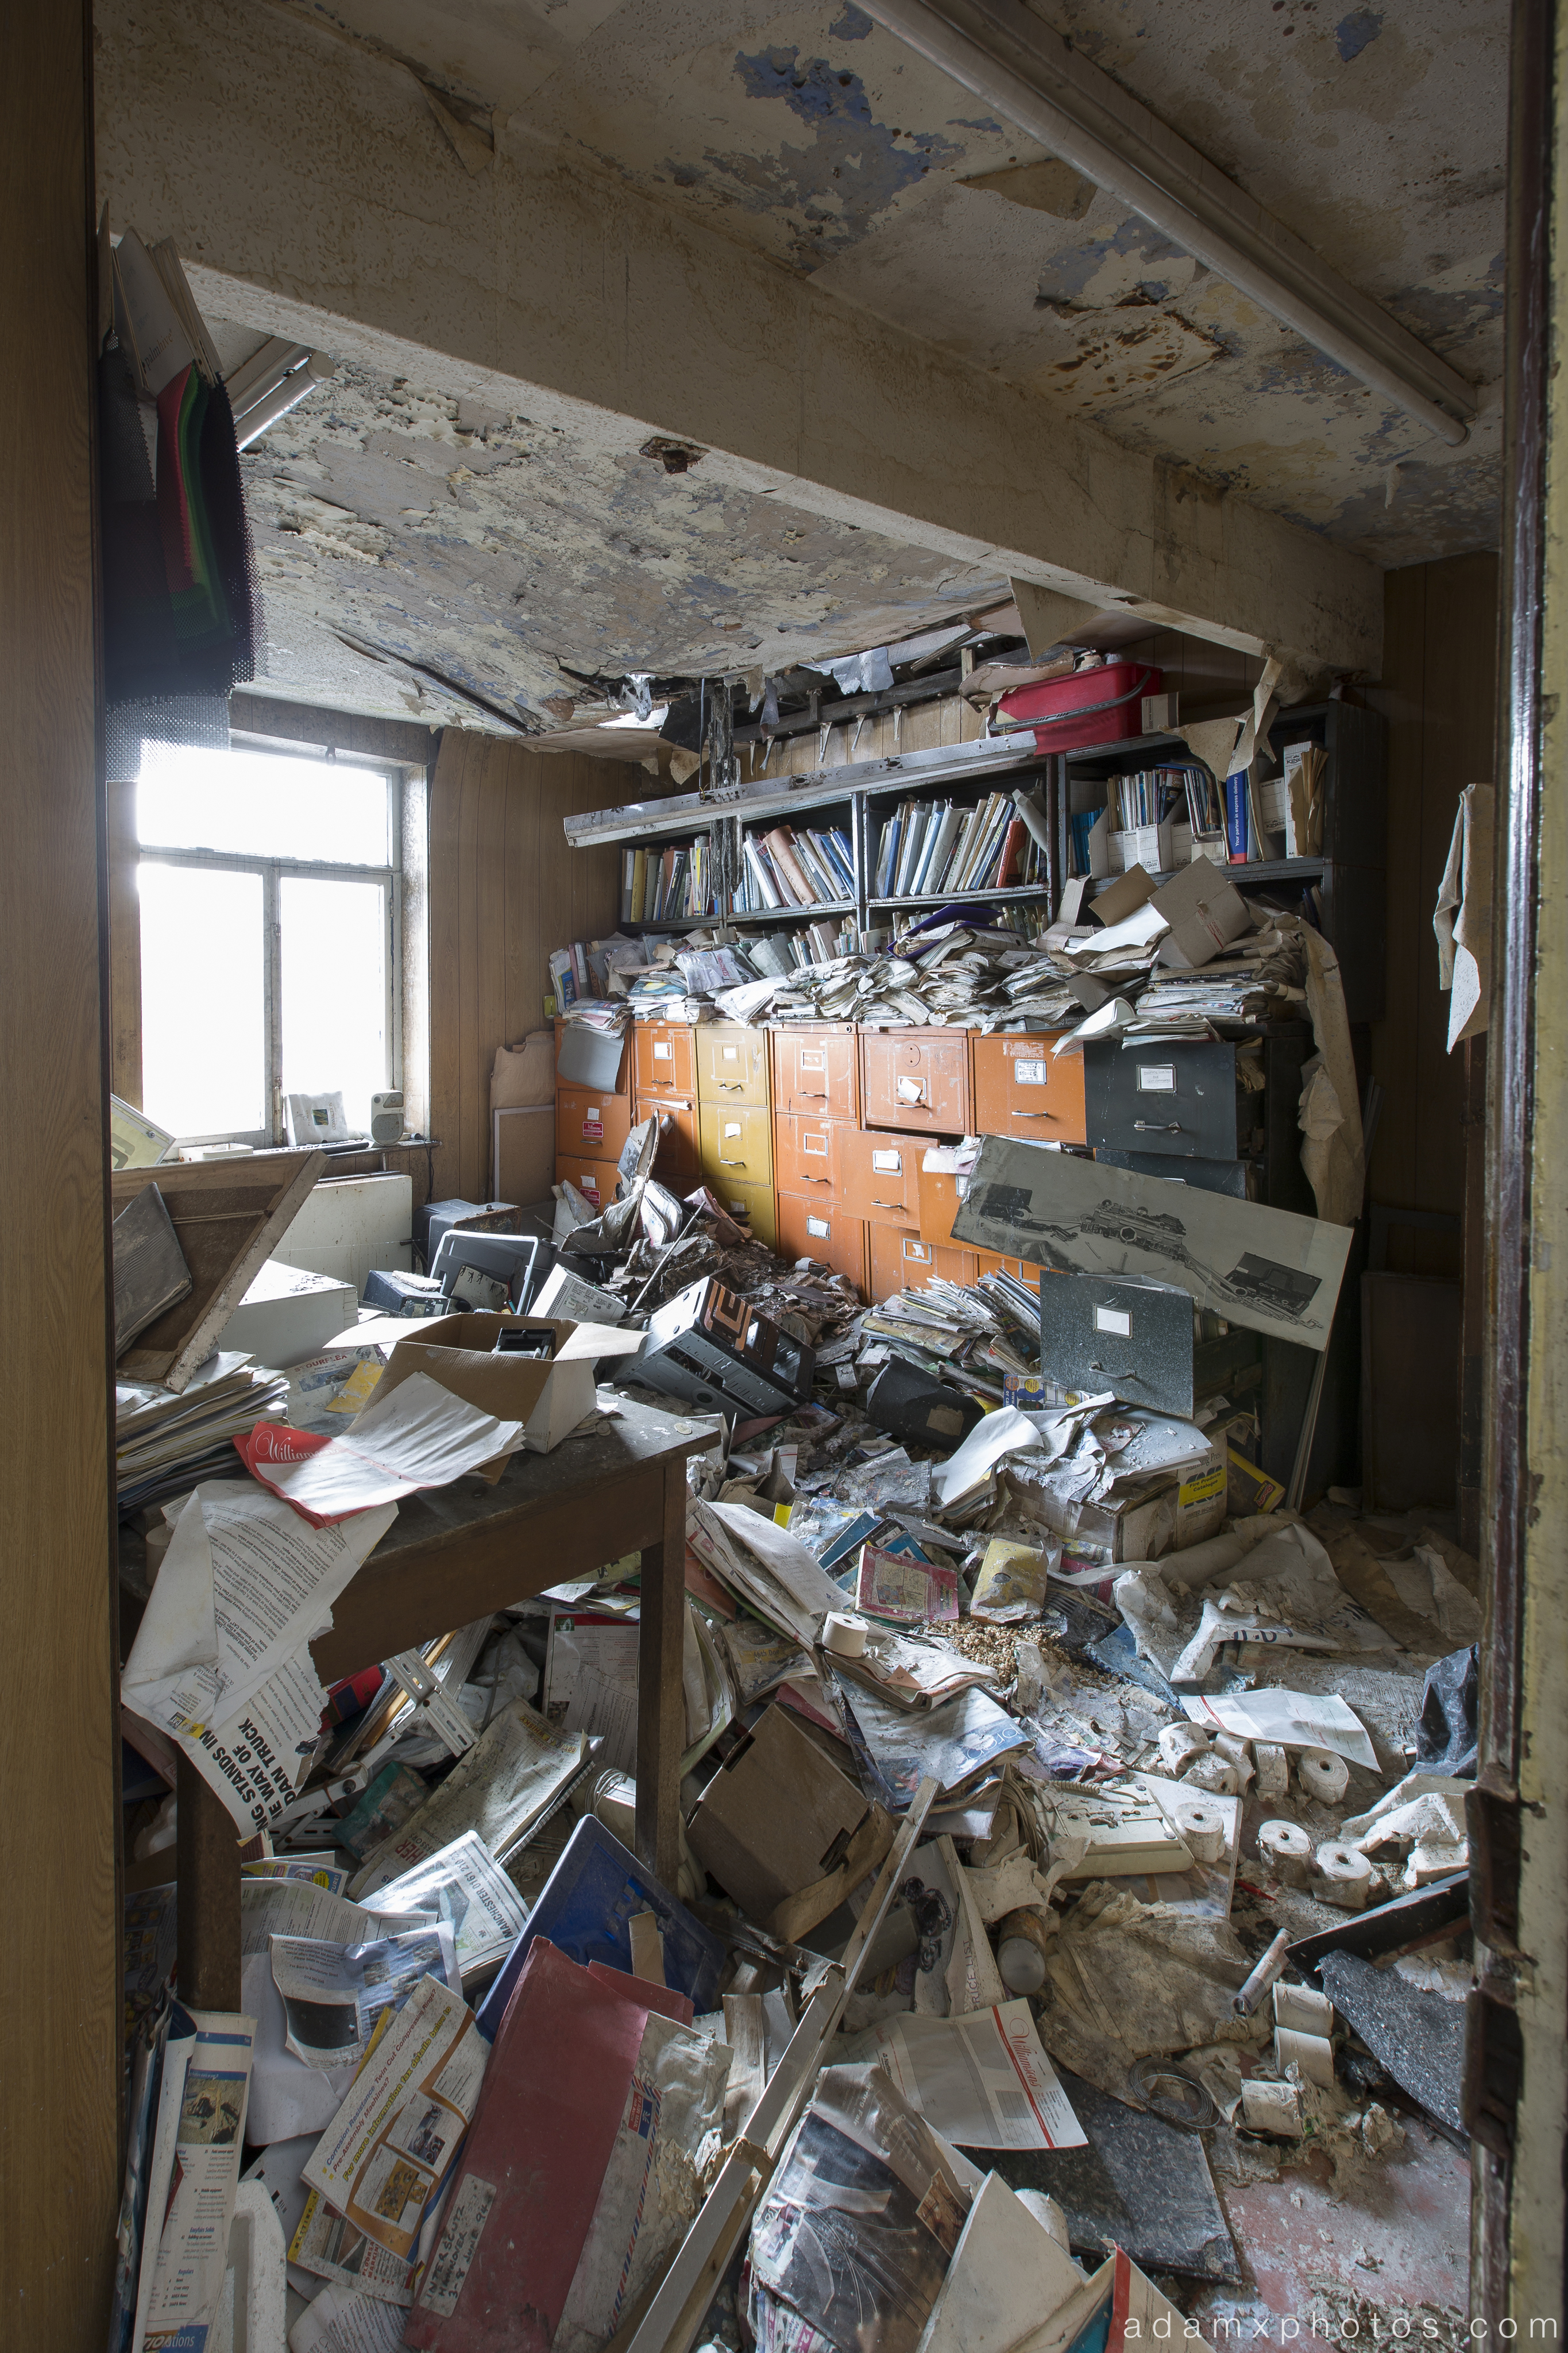 office mess messy Williamsons Fire and Rescue equipment Oldham Urbex Adam X Urban Exploration 2015 Abandoned decay lost forgotten derelict